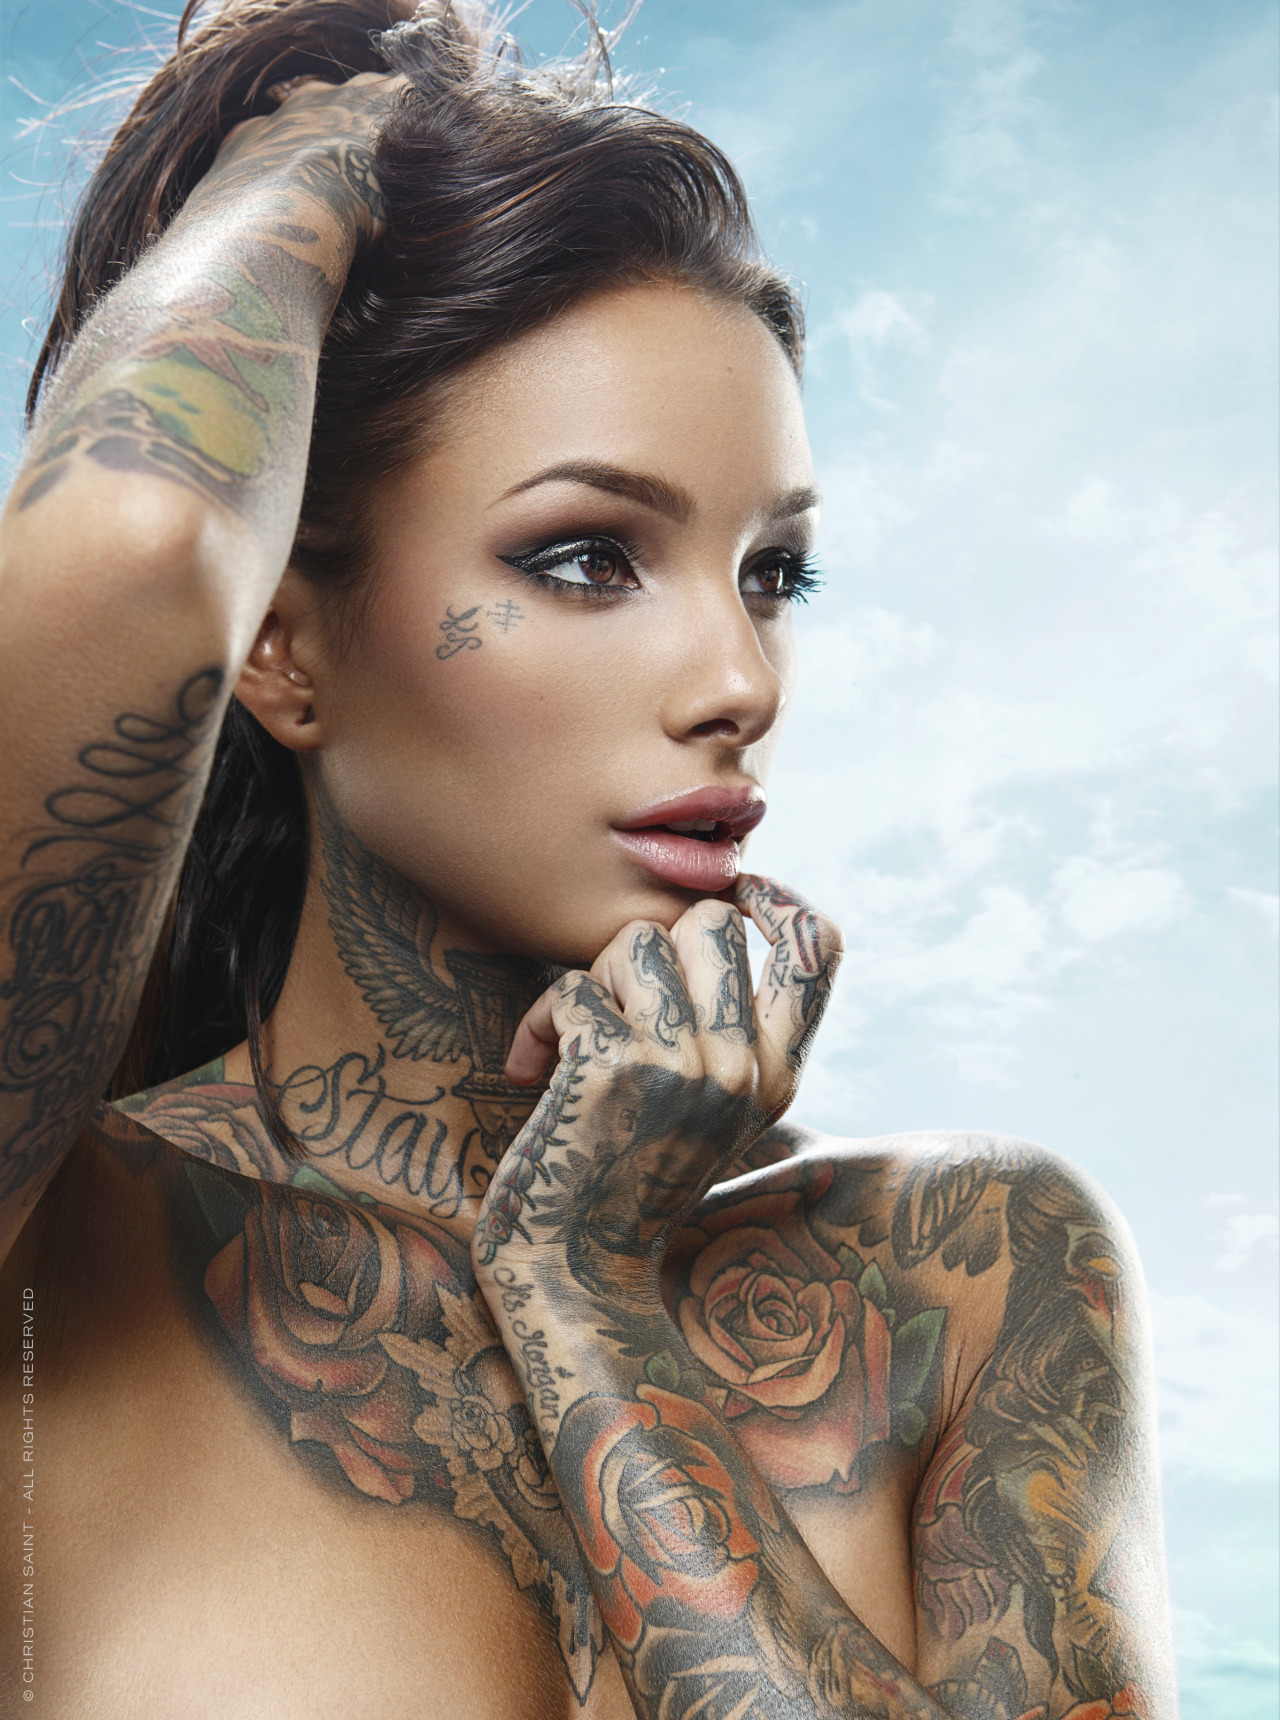 thechristiansaint: It’s July! Turn the page on your 2014 Cleo Wattenstrom / Tattoo